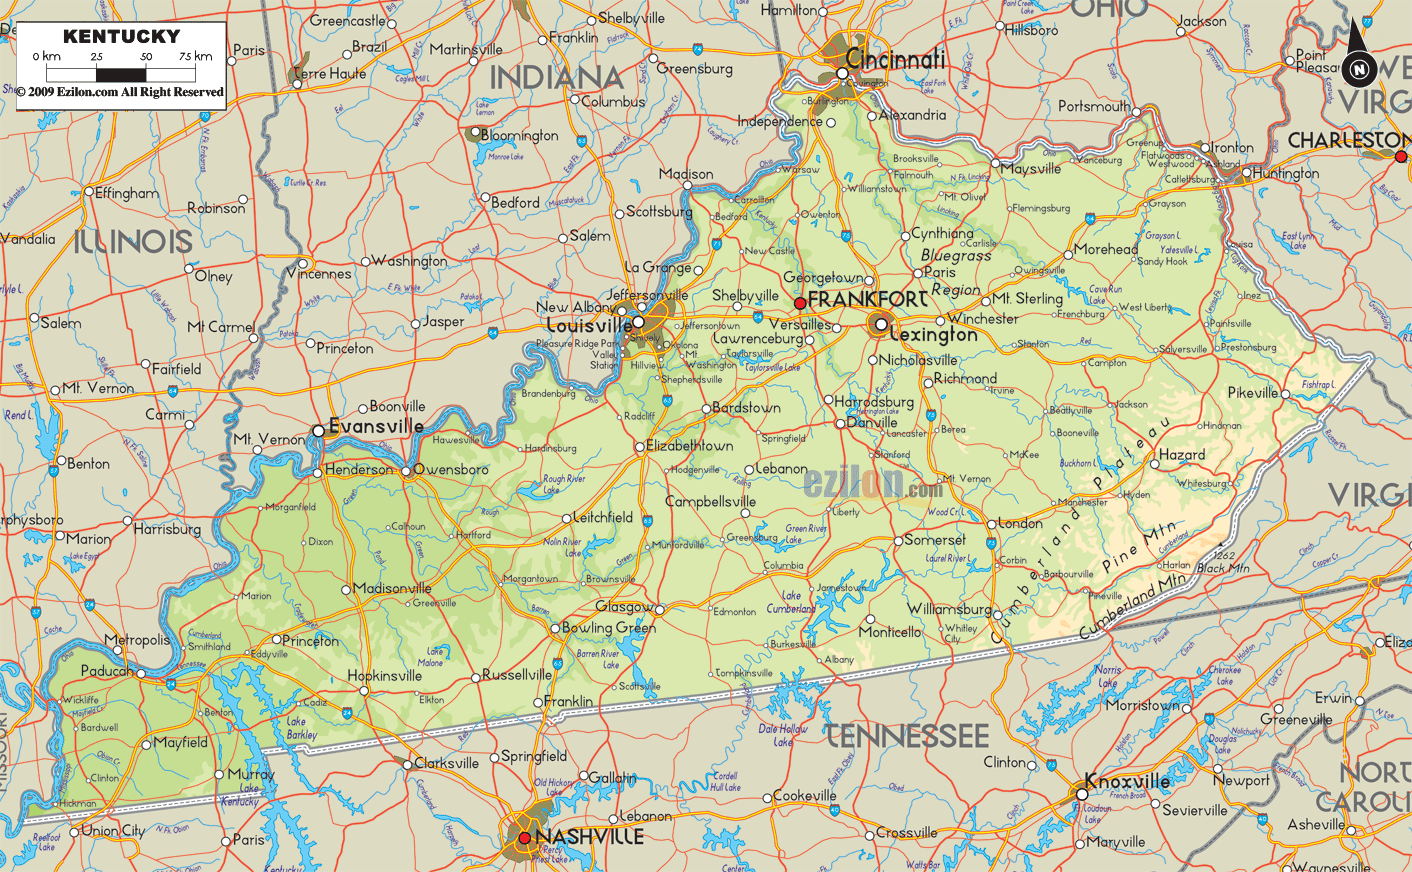 Physical map of Kentucky State, USA showing major geographical features such as rivers, lakes, topography and land formations.